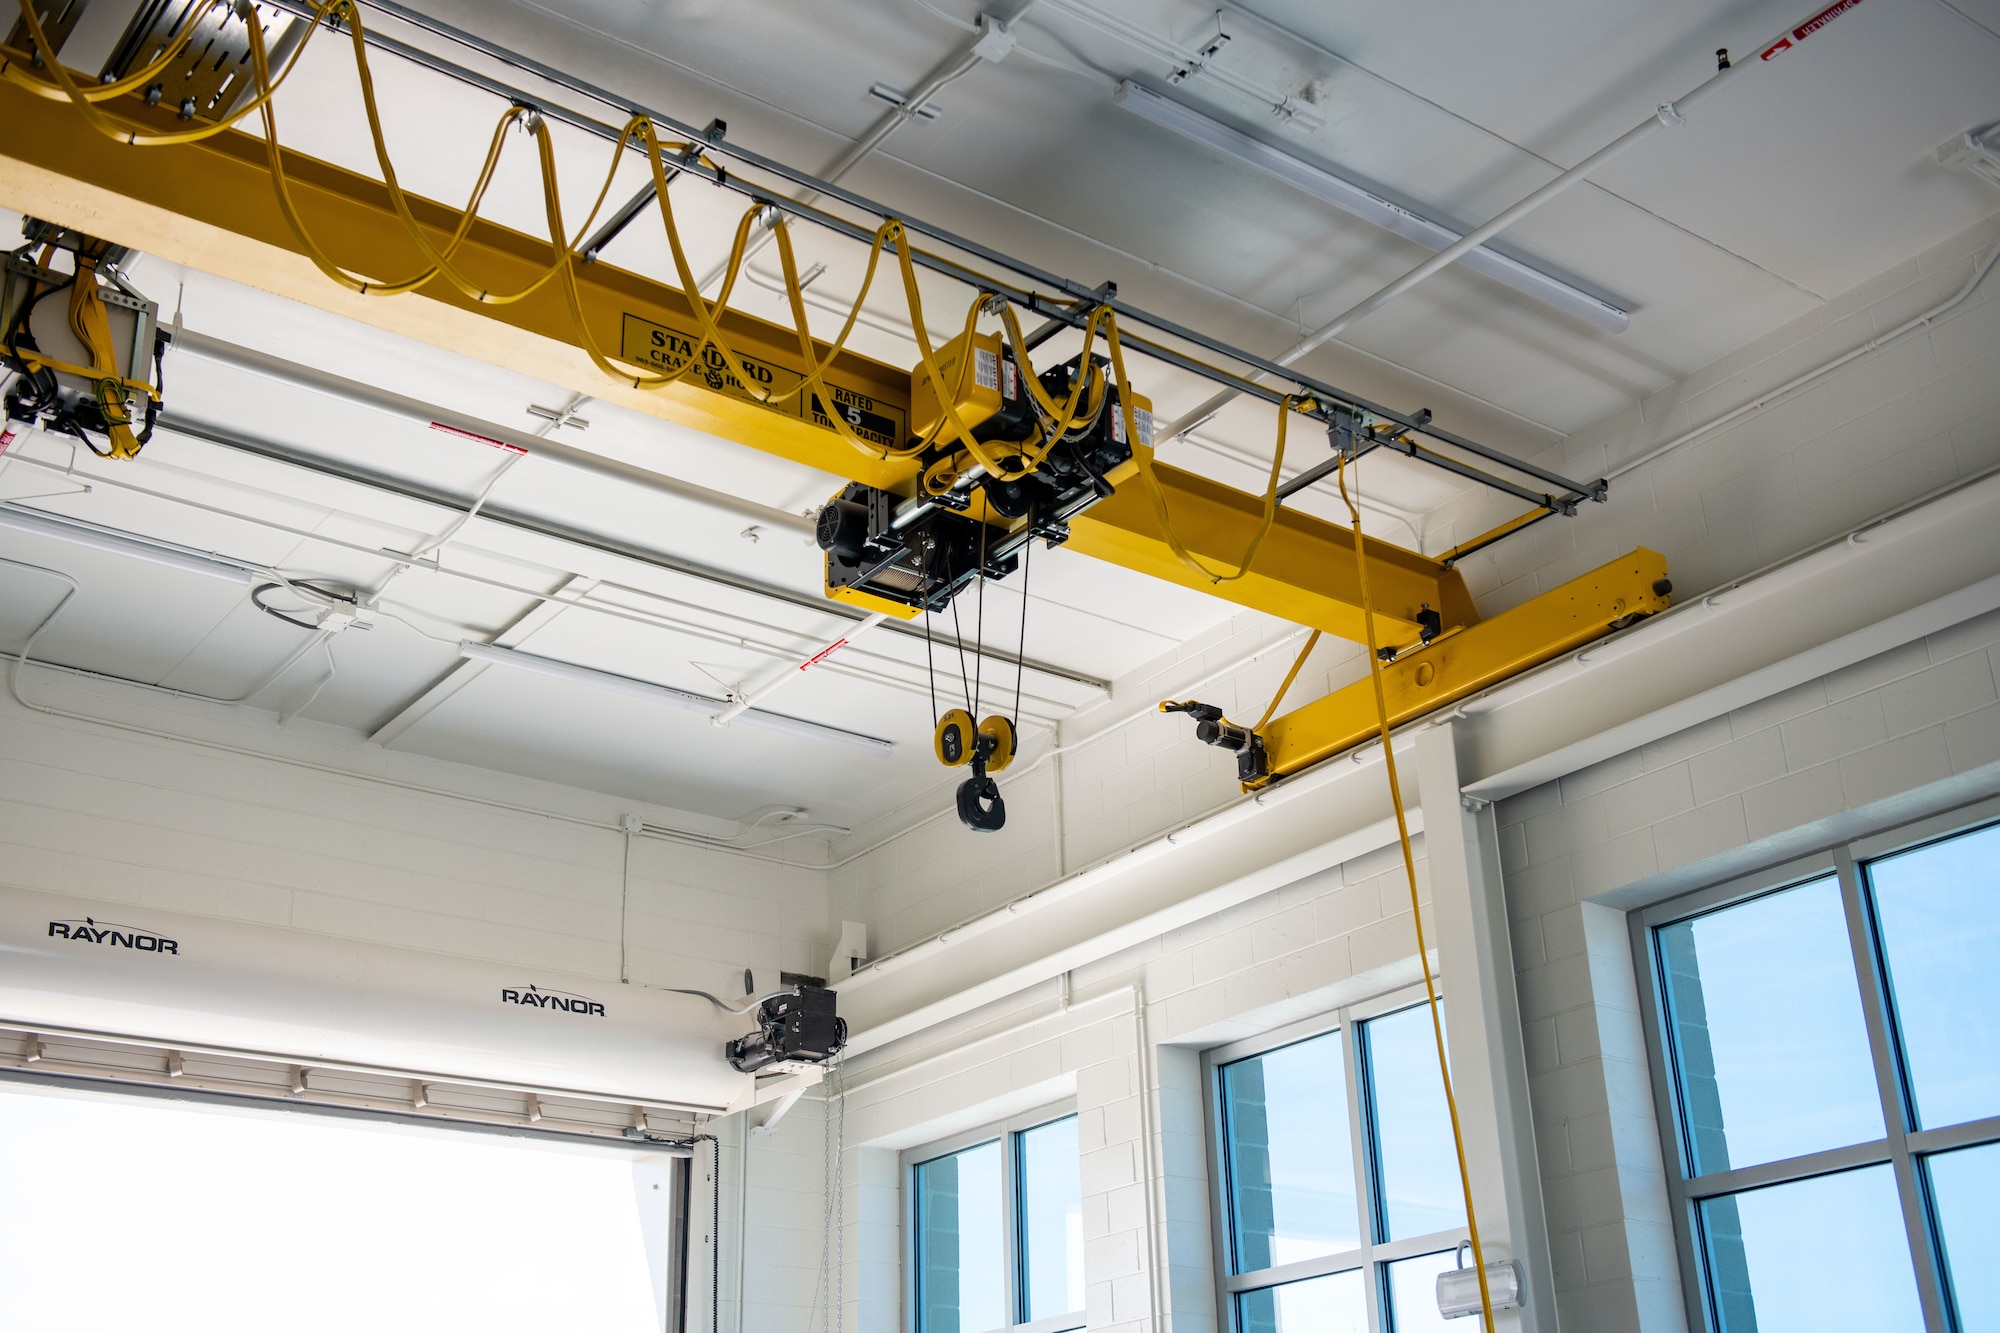 Large yellow overhead crane installed on building roof.